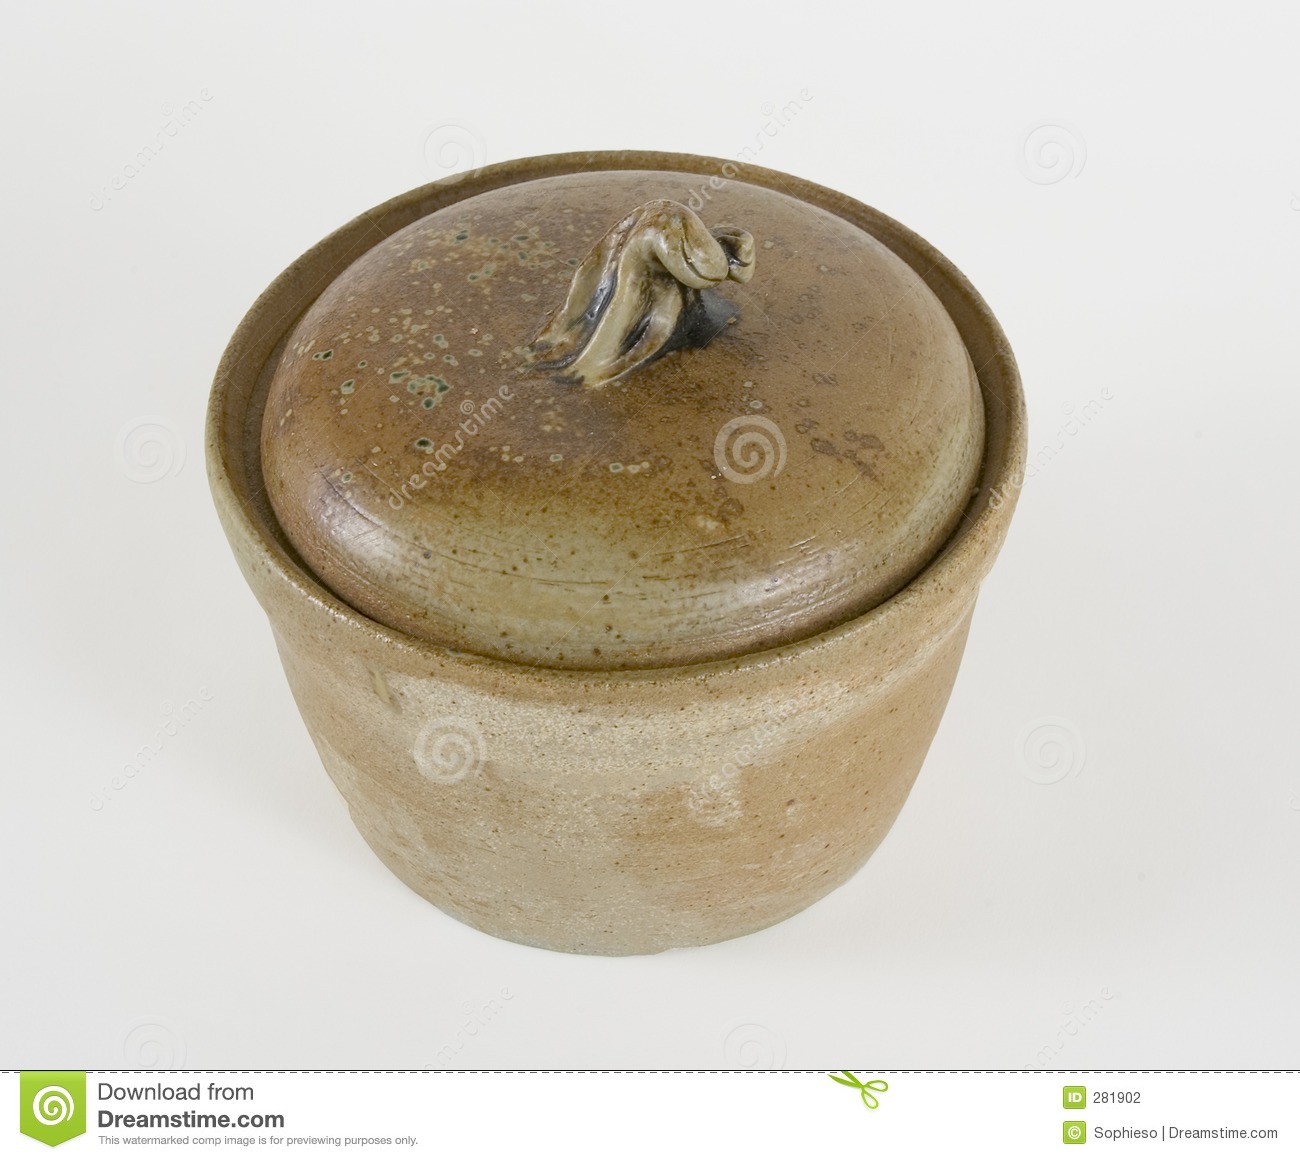 Handthrown Stoneware Bean Pot With Brown Glaze And Ash